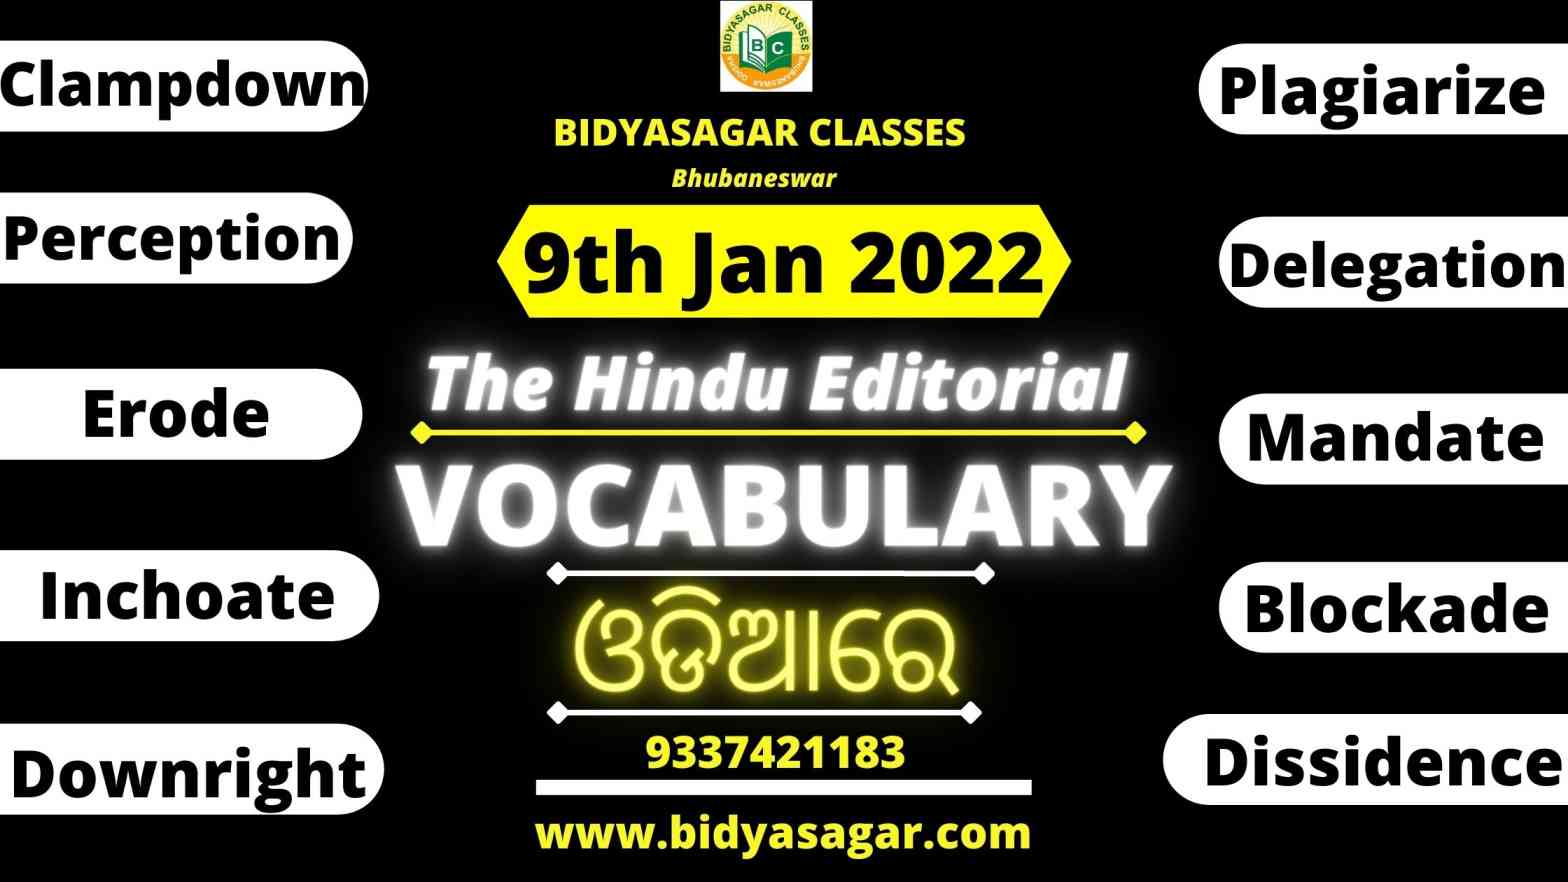 The Hindu Editorial Vocabulary of 9th January 2022